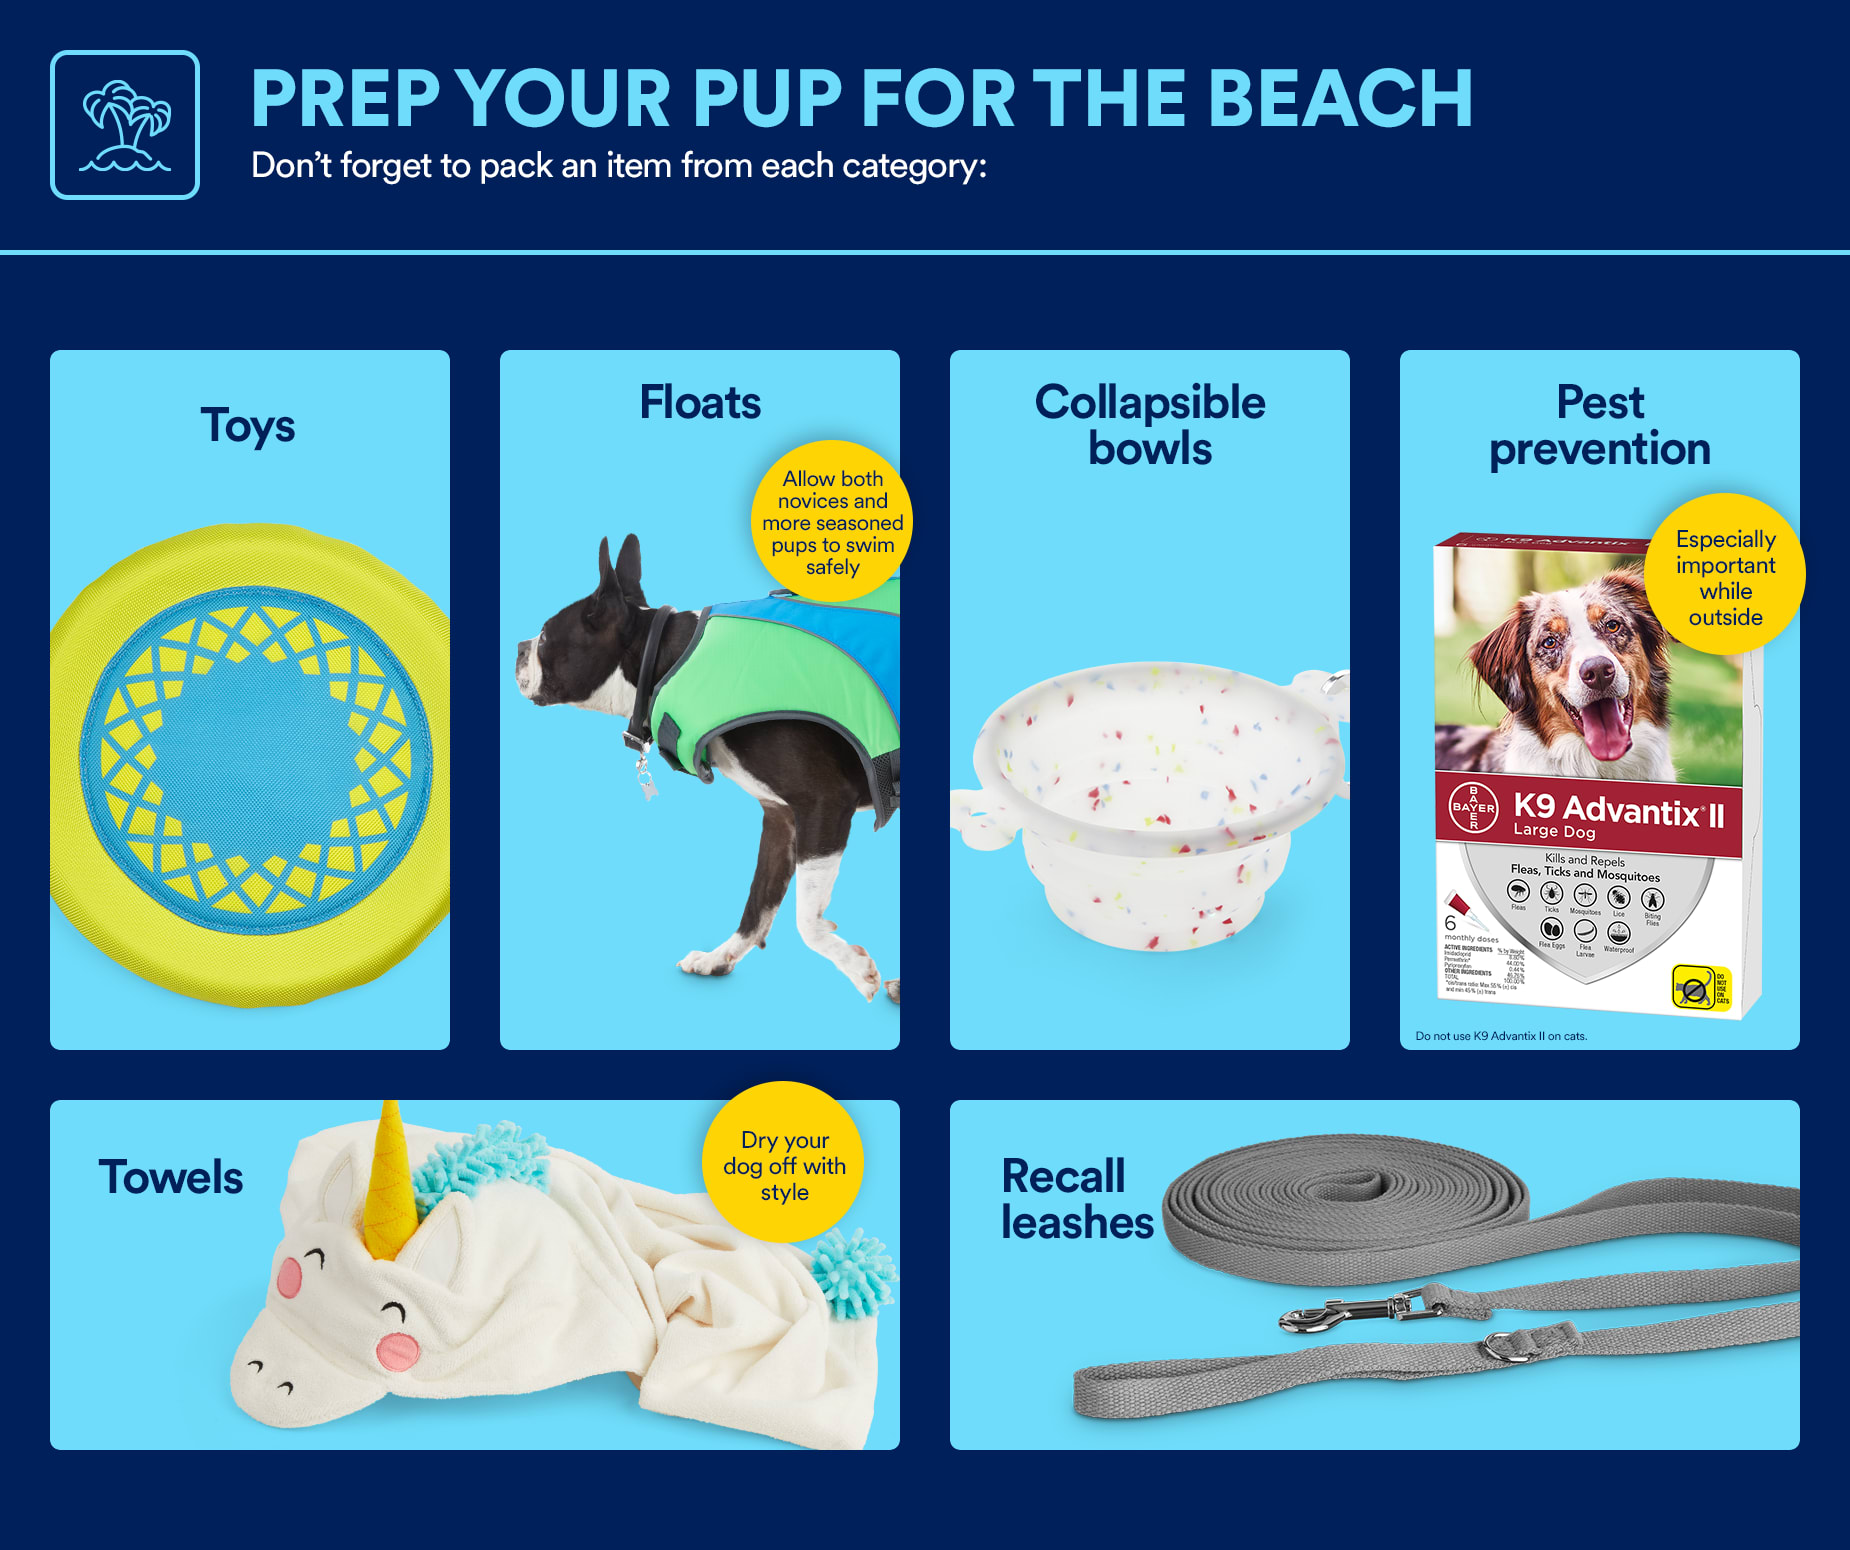 IV. Comfort and Shade for Your Dog at the Beach